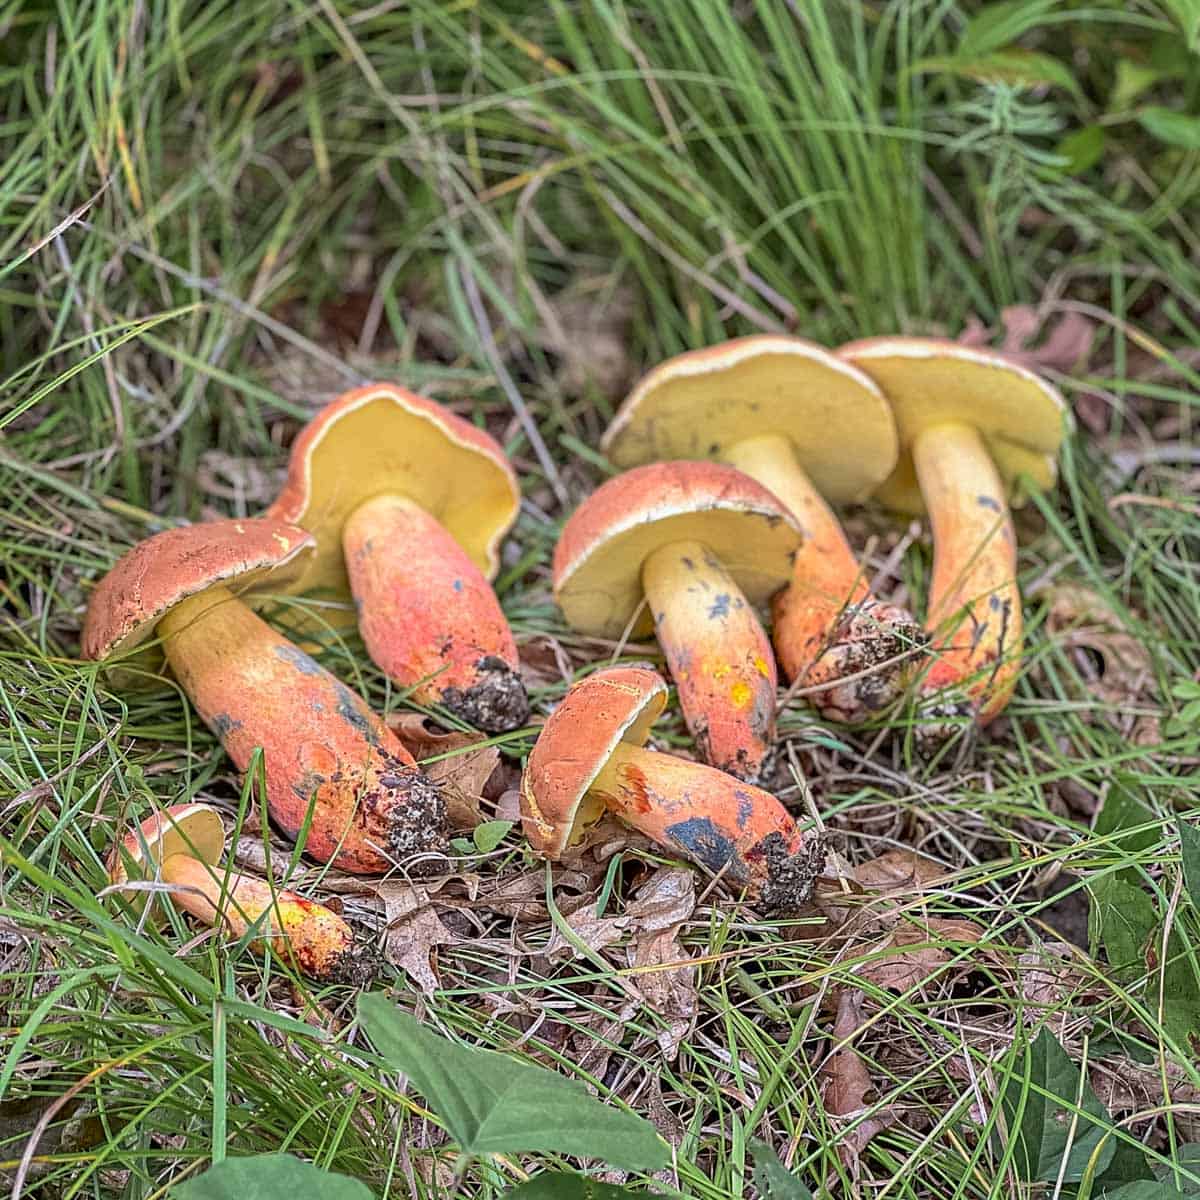 Pink and yellow bolete mushrooms in grass laid out for identification